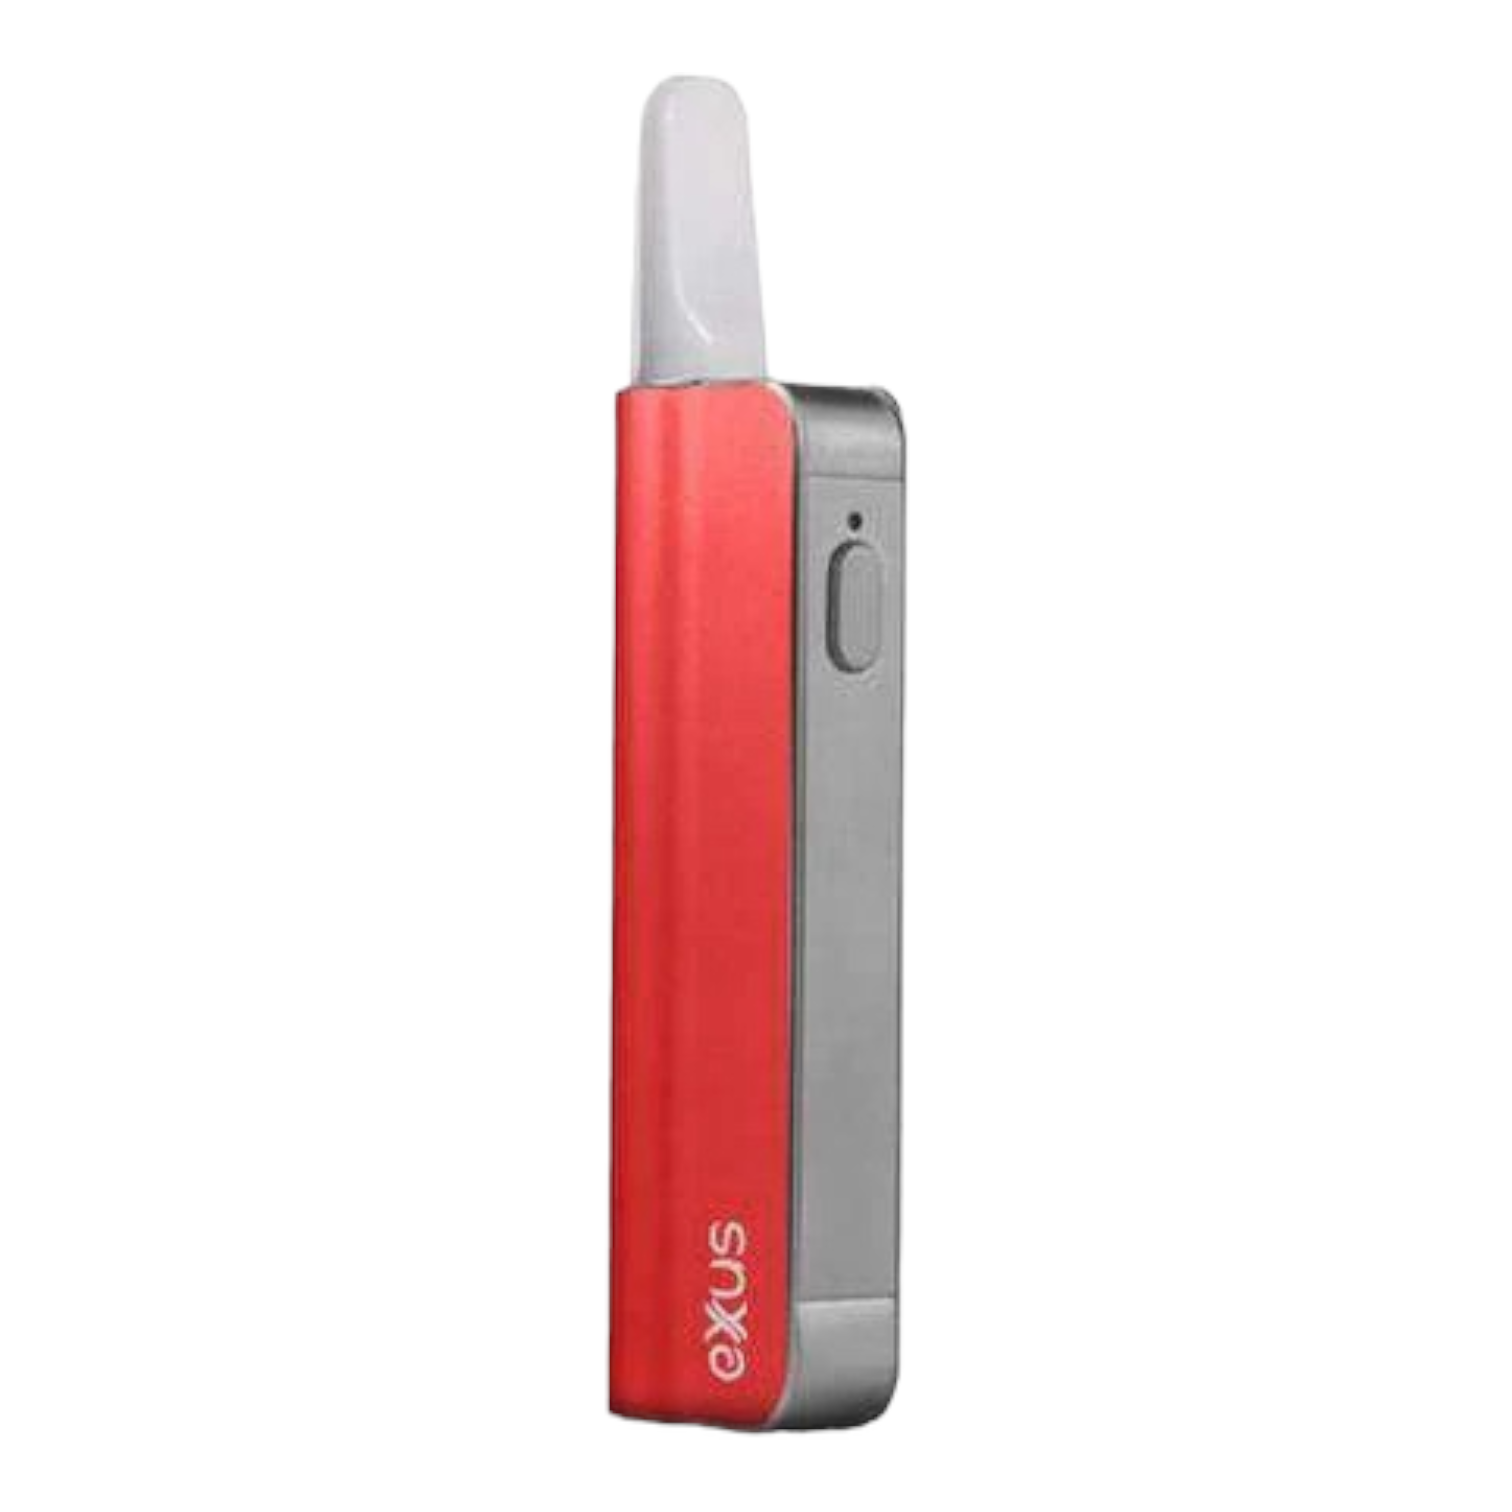 Exxus Snap - Variable Voltage 510 Cartridge Battery - Red